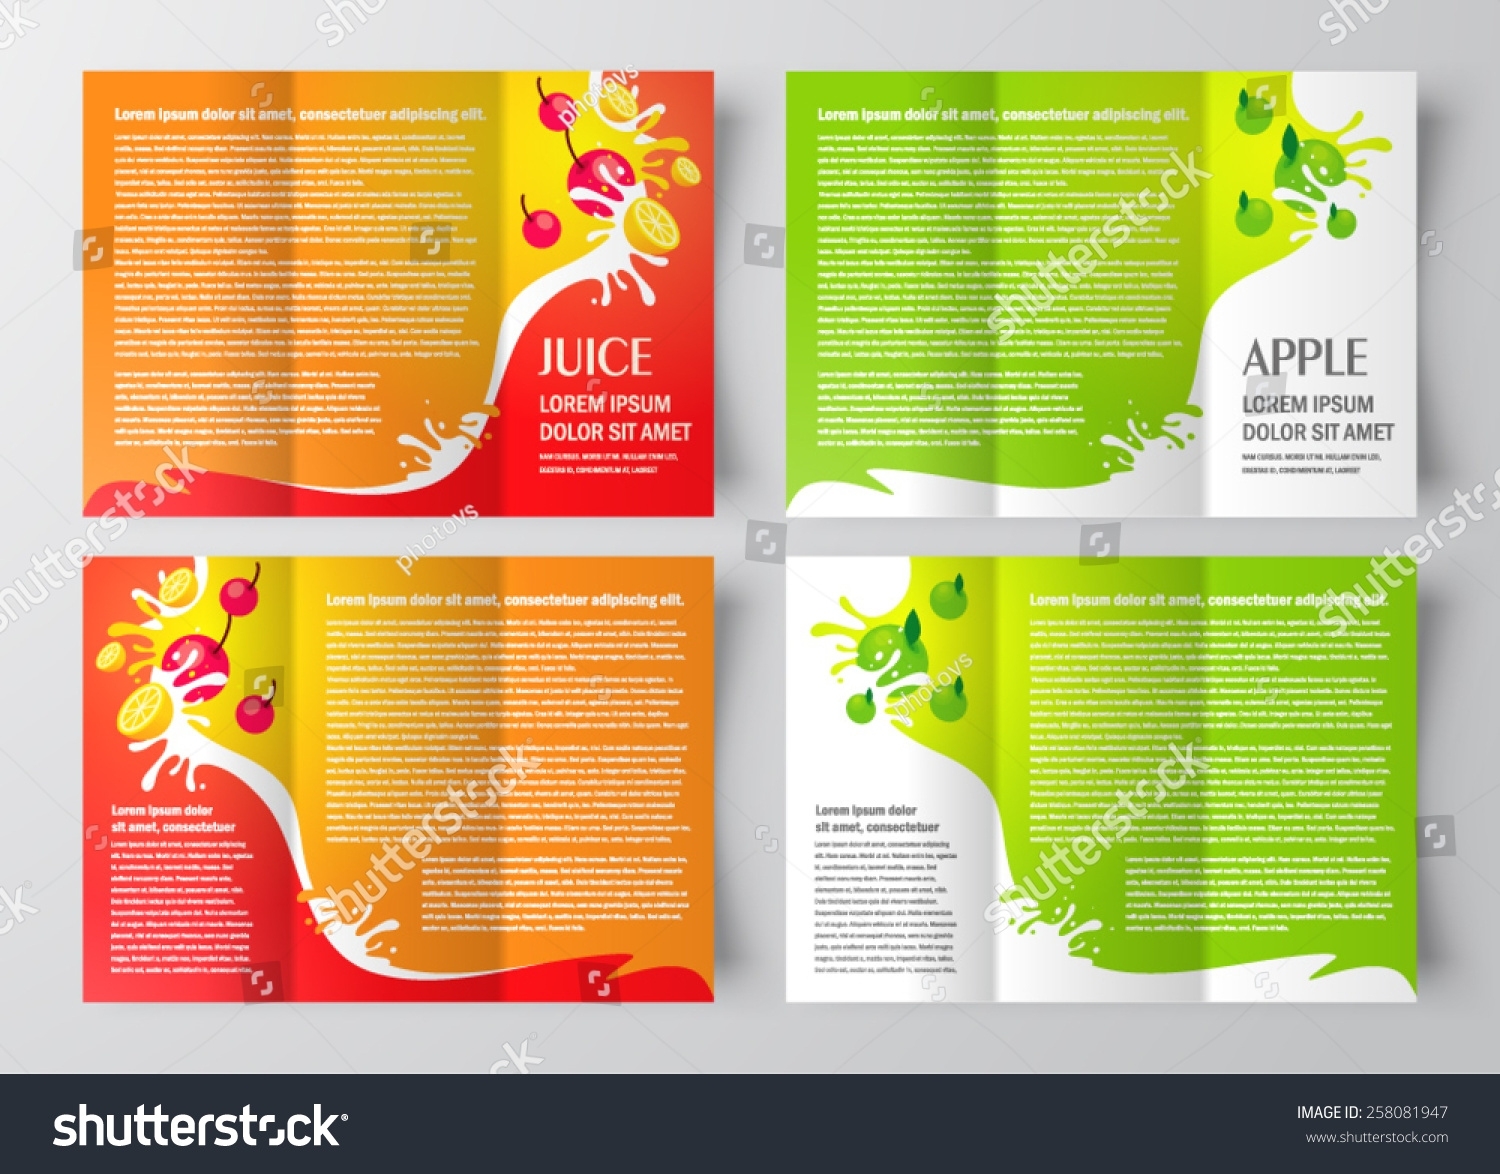 Download Free Tri Fold Brochure Template For Mac - Fototree For Mac Brochure Templates